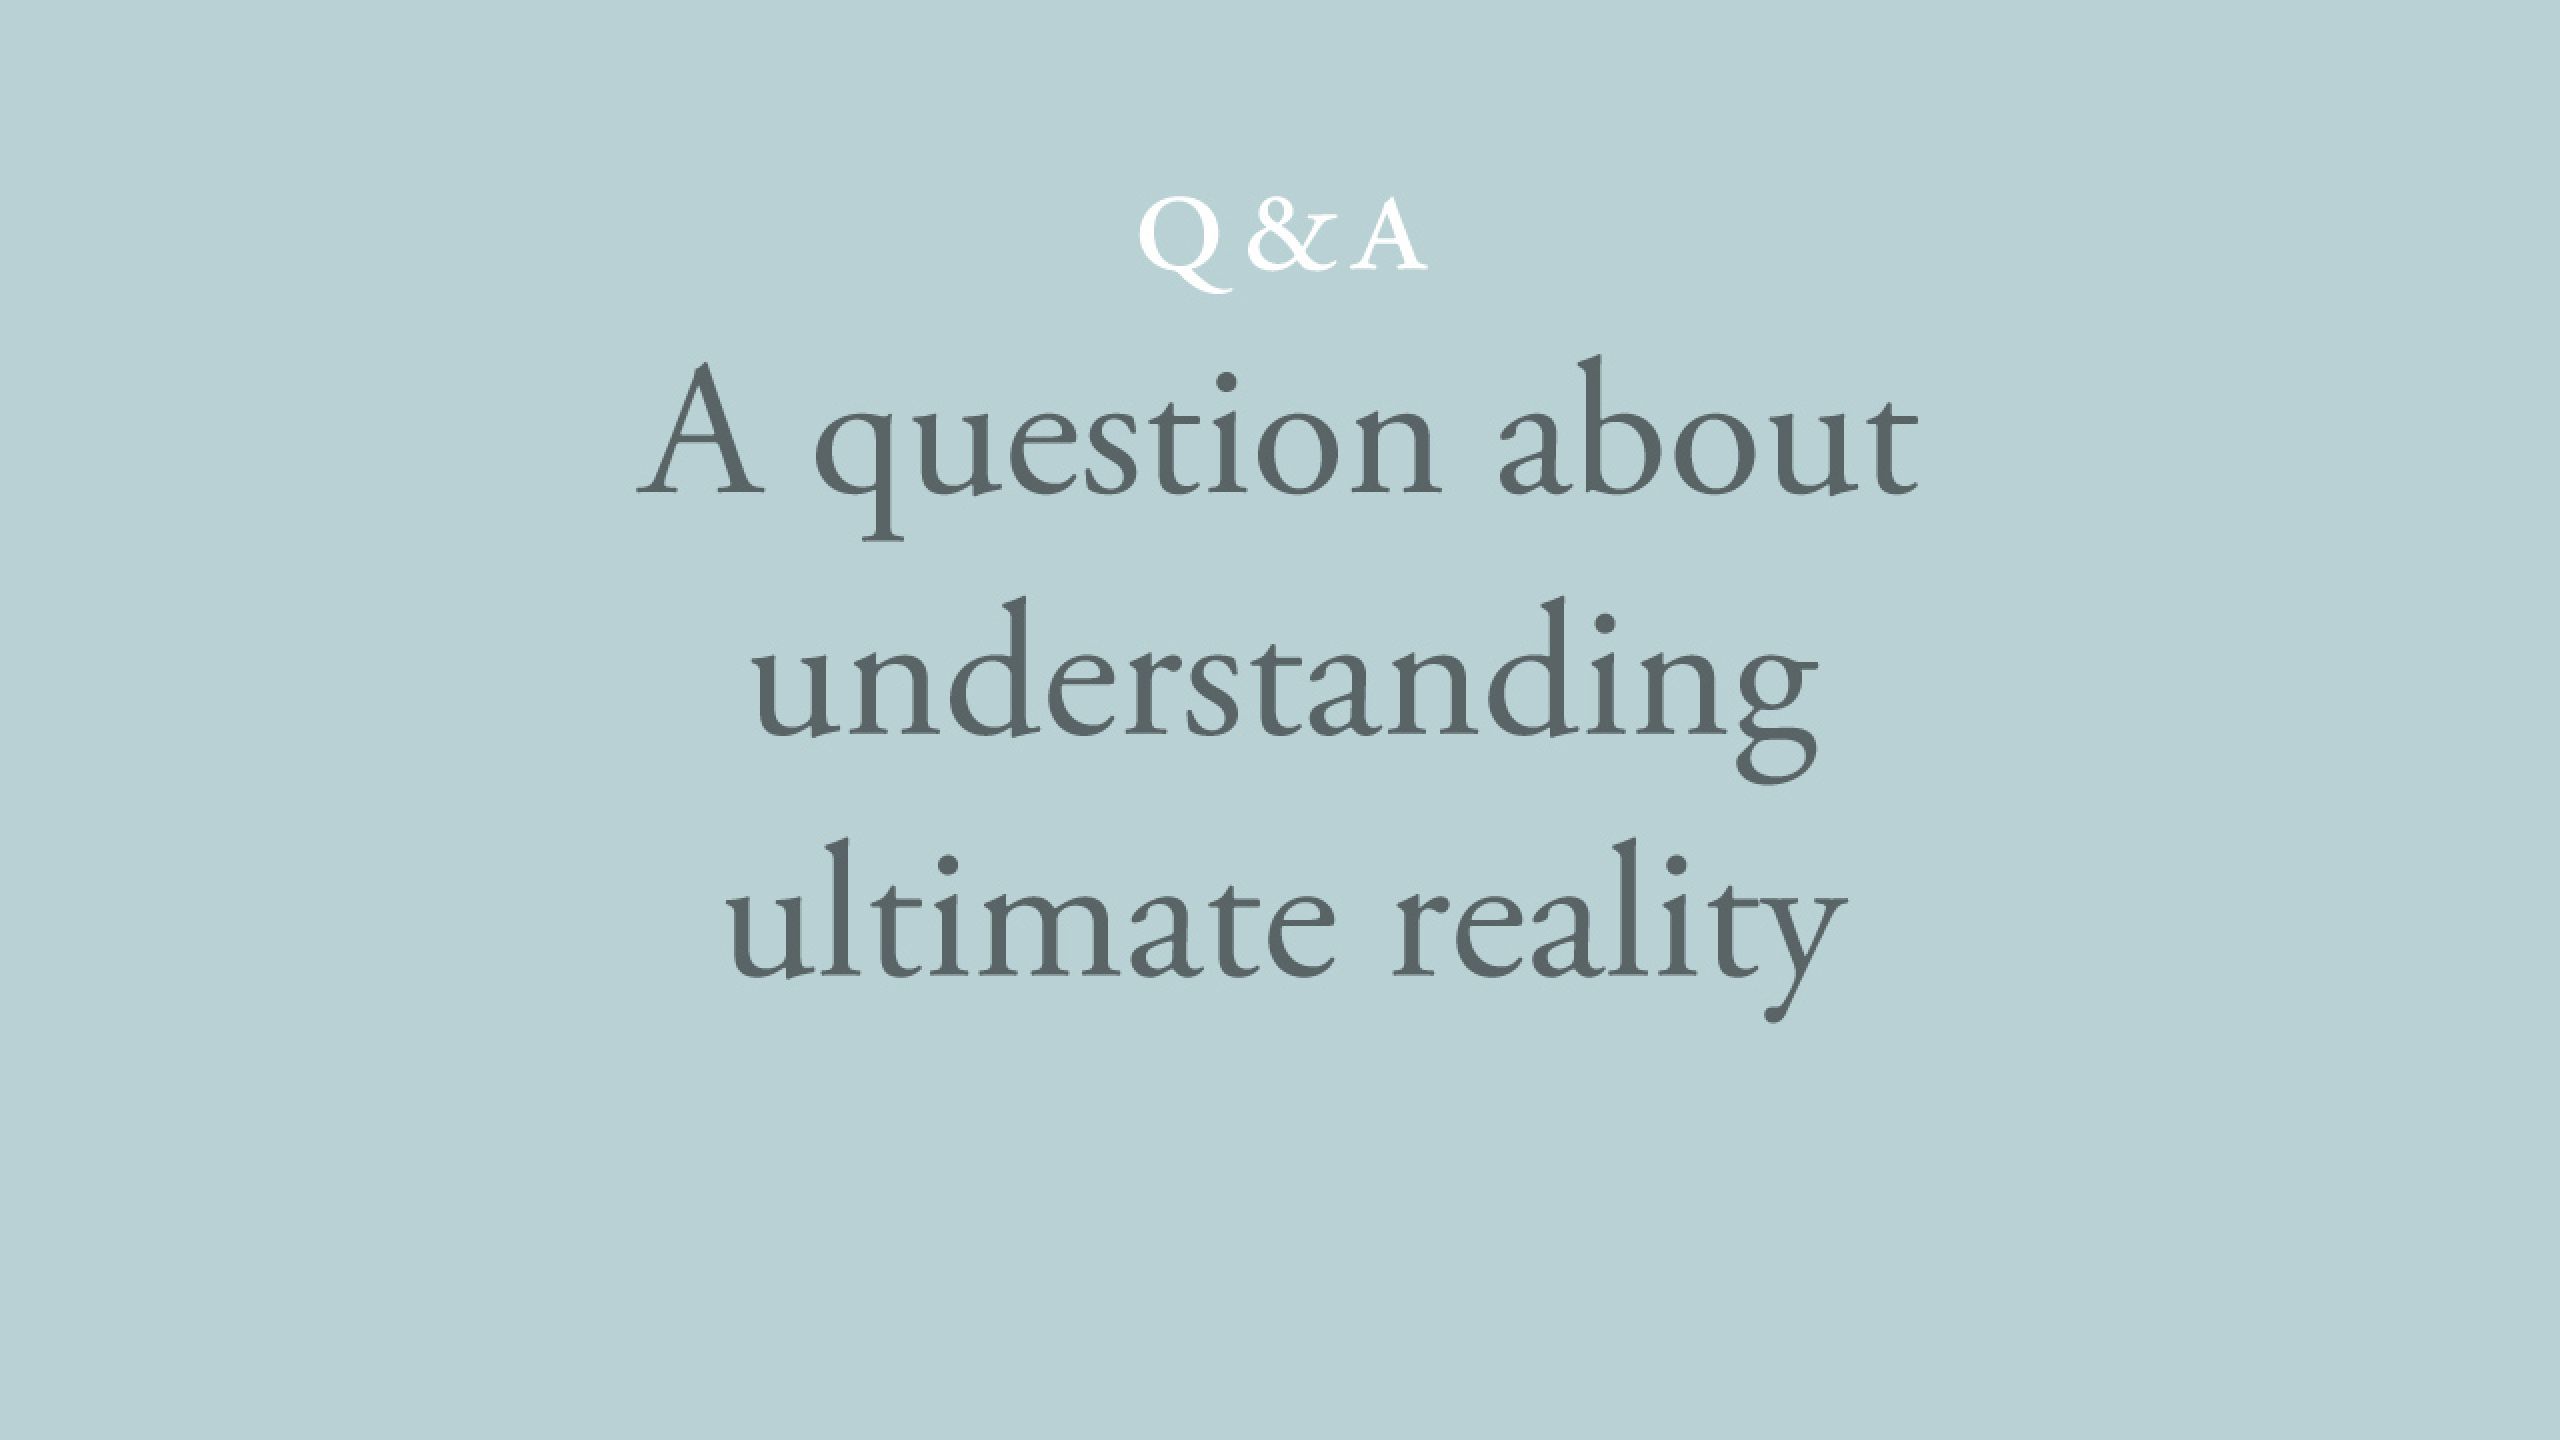 What knowledge helps us understand ultimate reality?